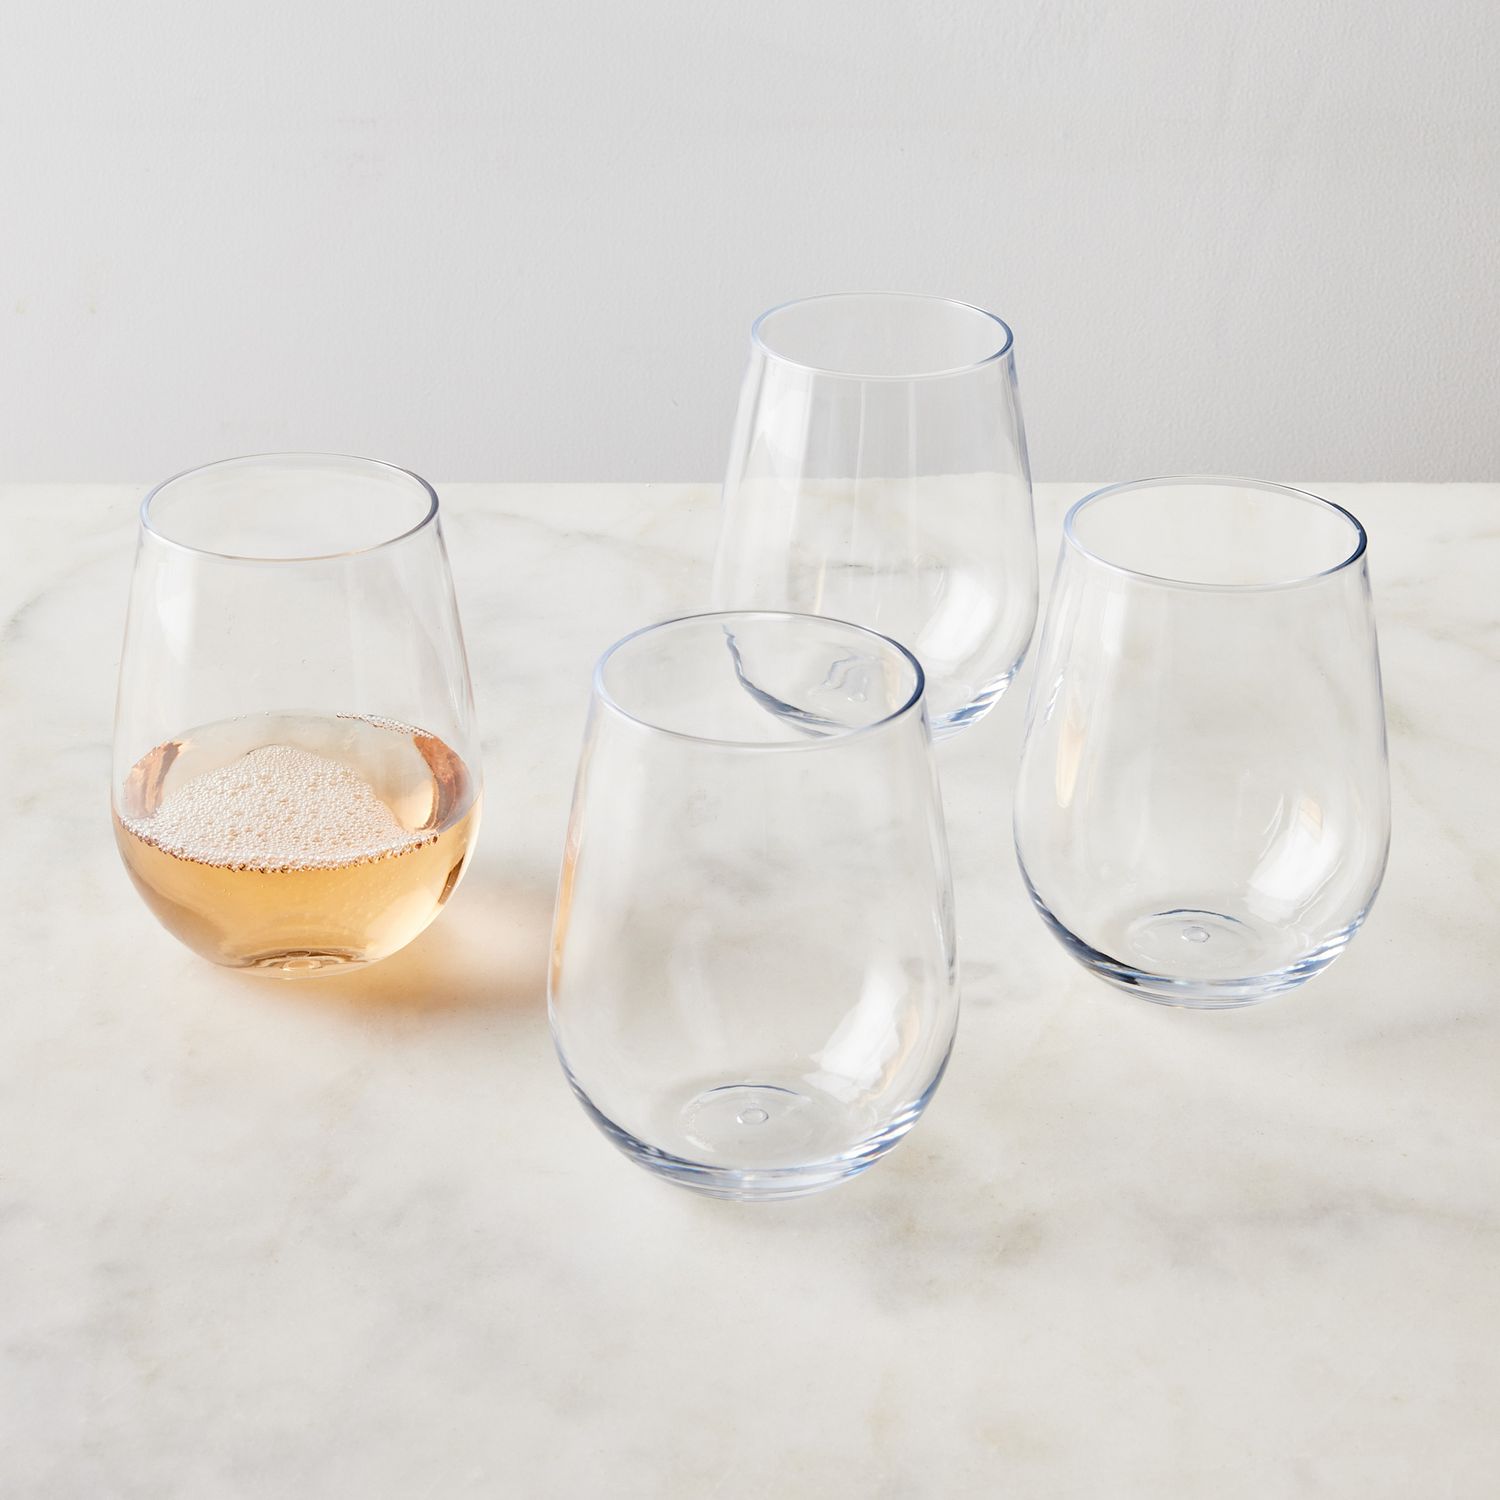 Tossware Reserve Tritan Copolyester Stemless Champagne Flutes, Set of 4 on  Food52